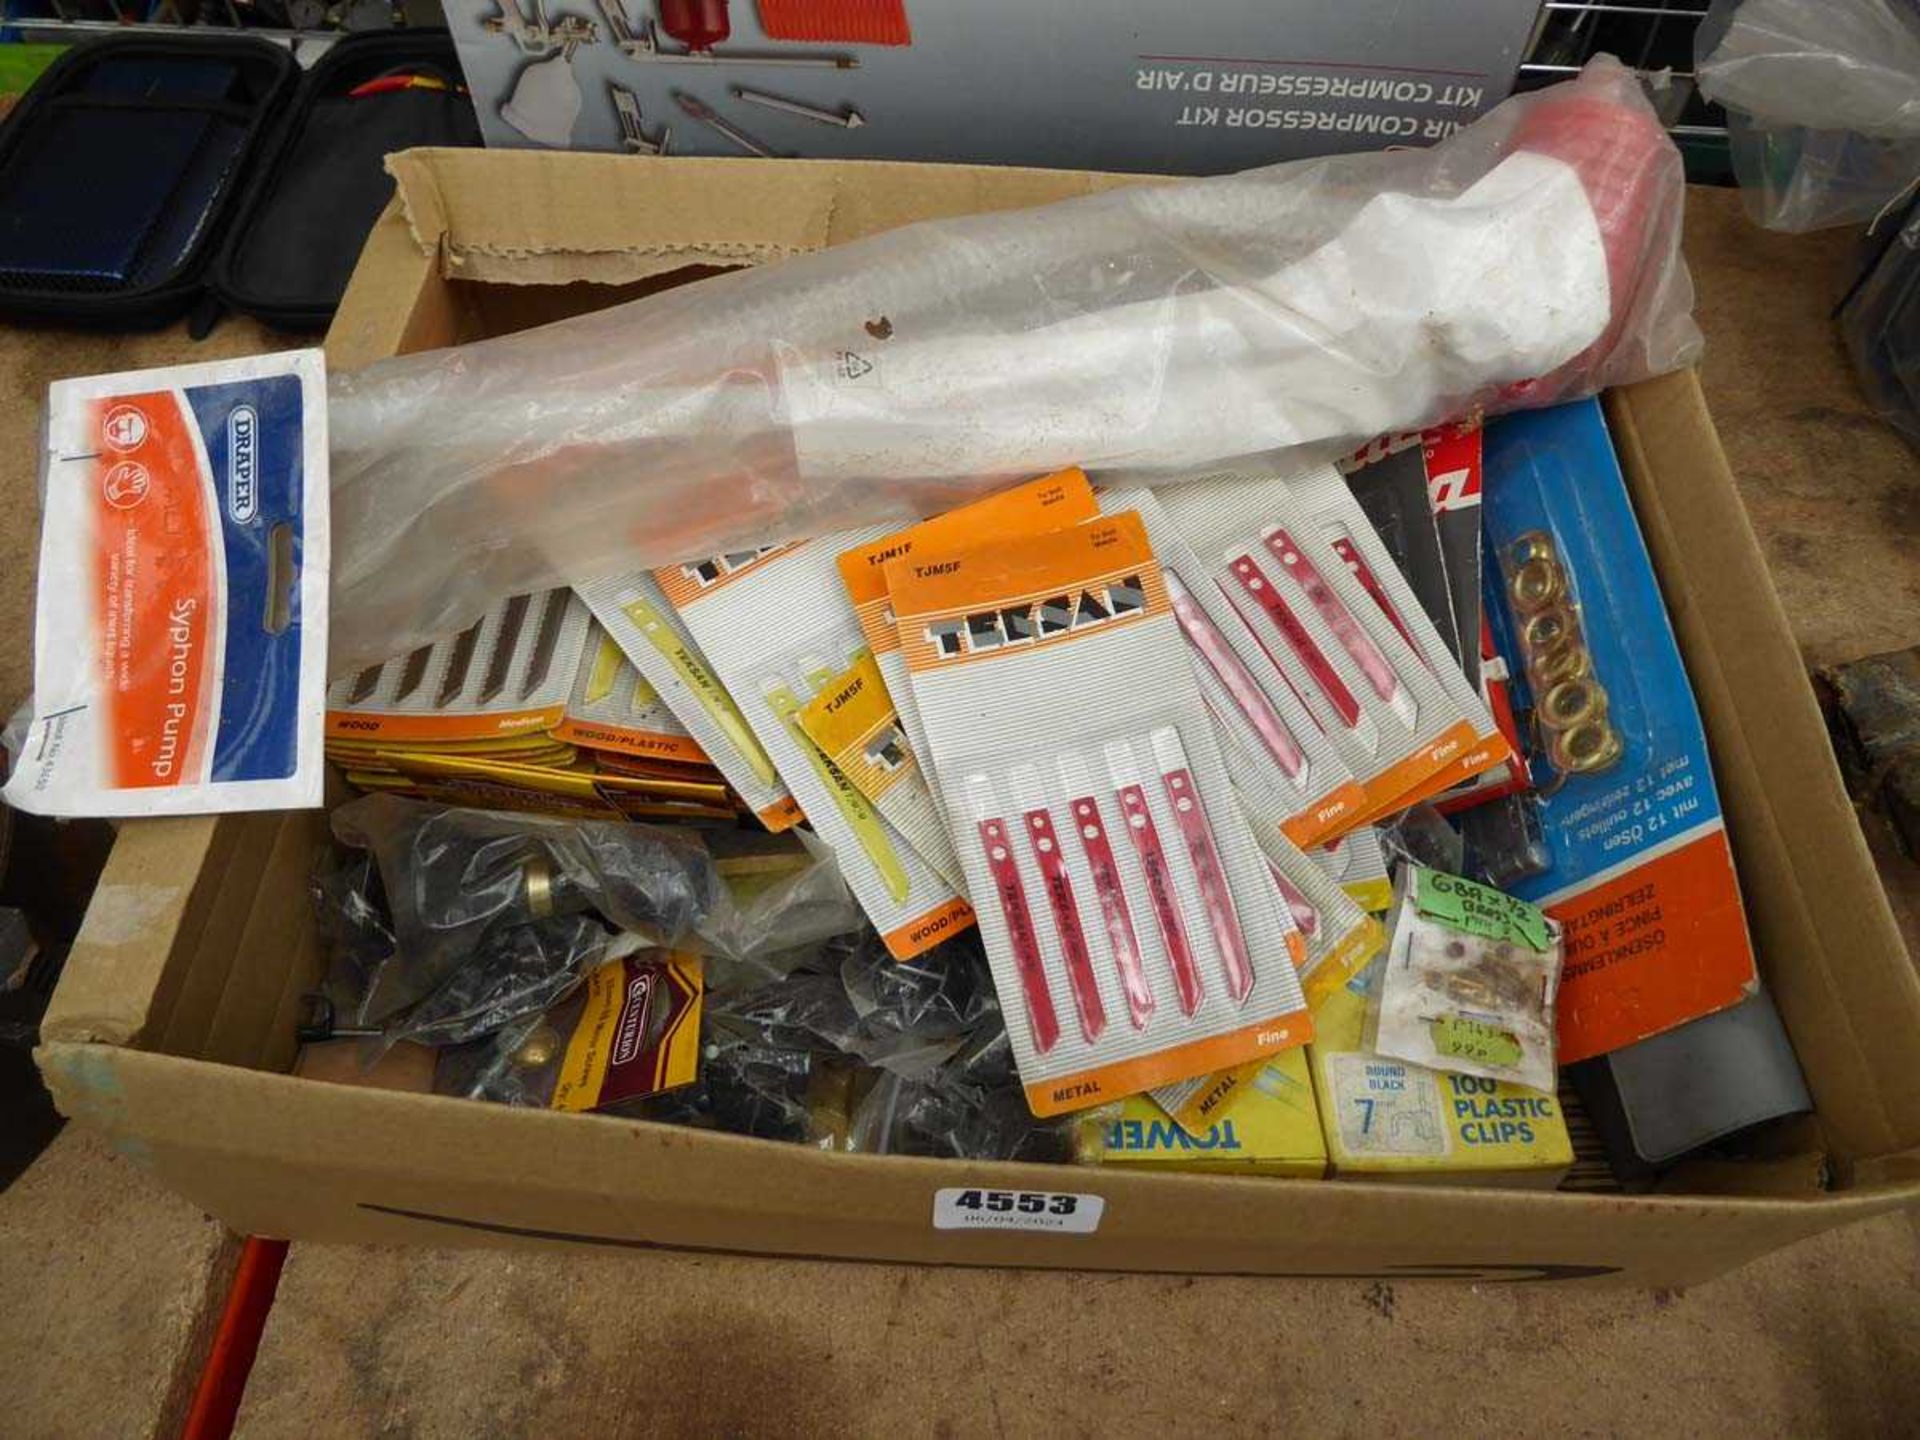 Box containing jigsaw saw blades, plastic clips, screws and other hardware